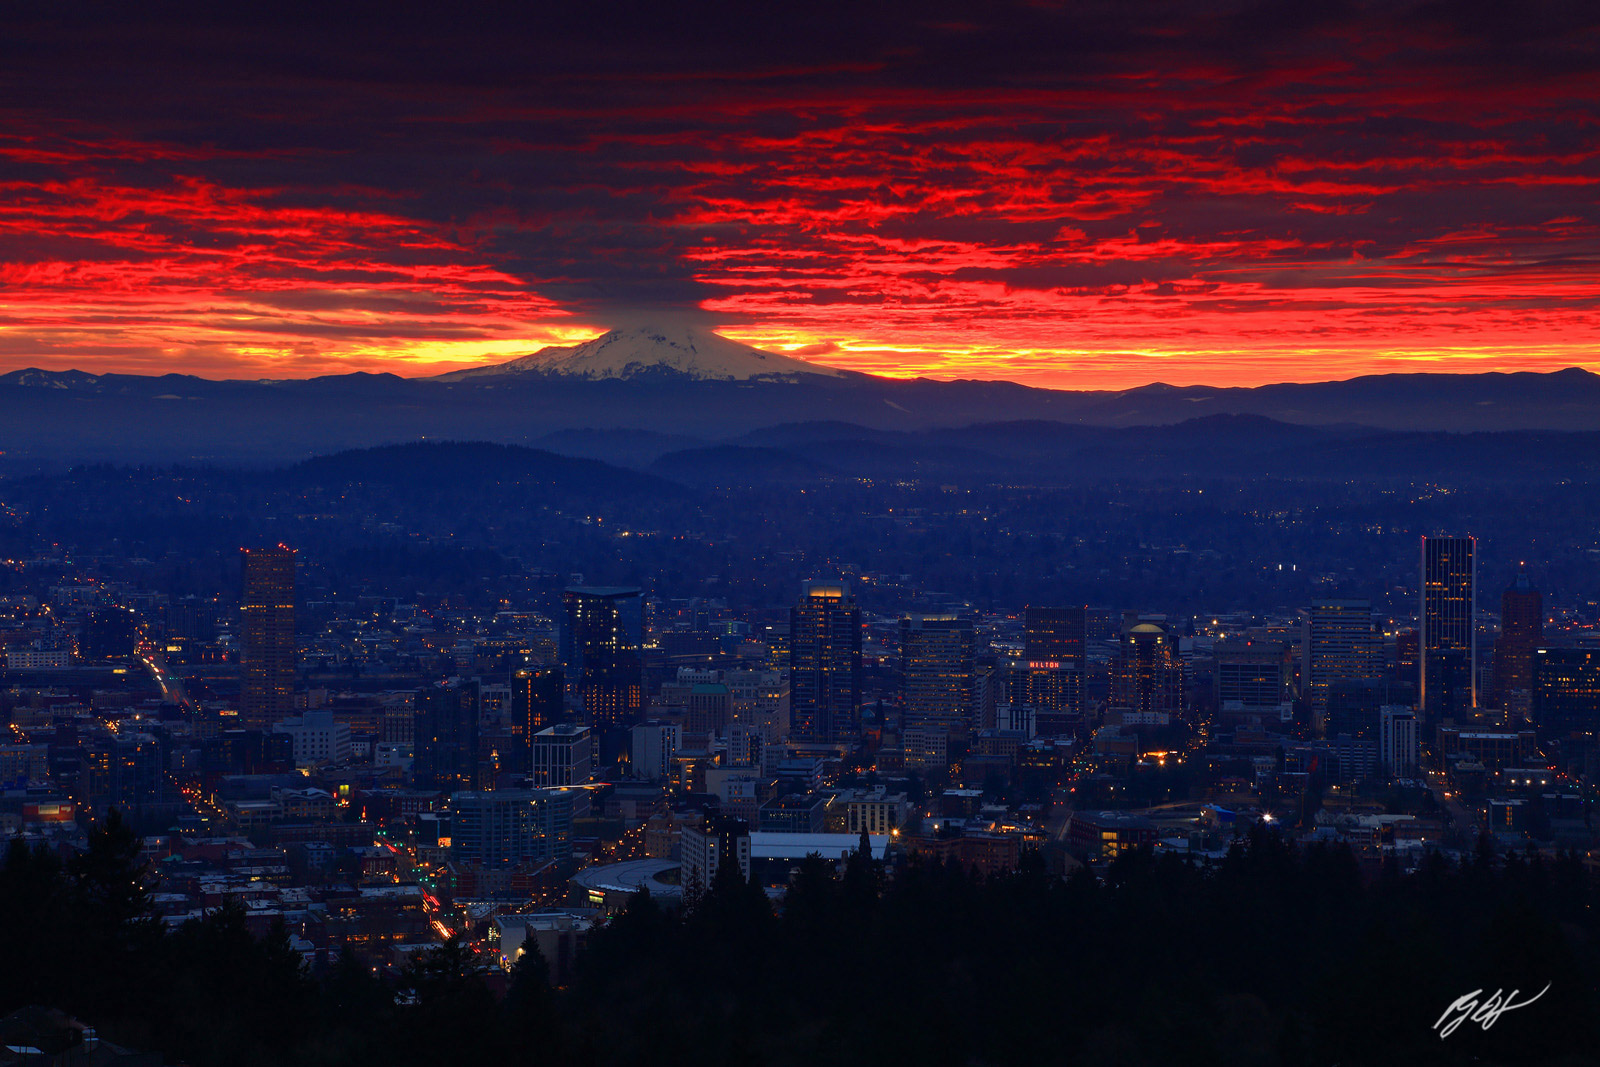 Sunrise over Portland and Mt Hood from the Pittock Mansion in Portland, Oregon